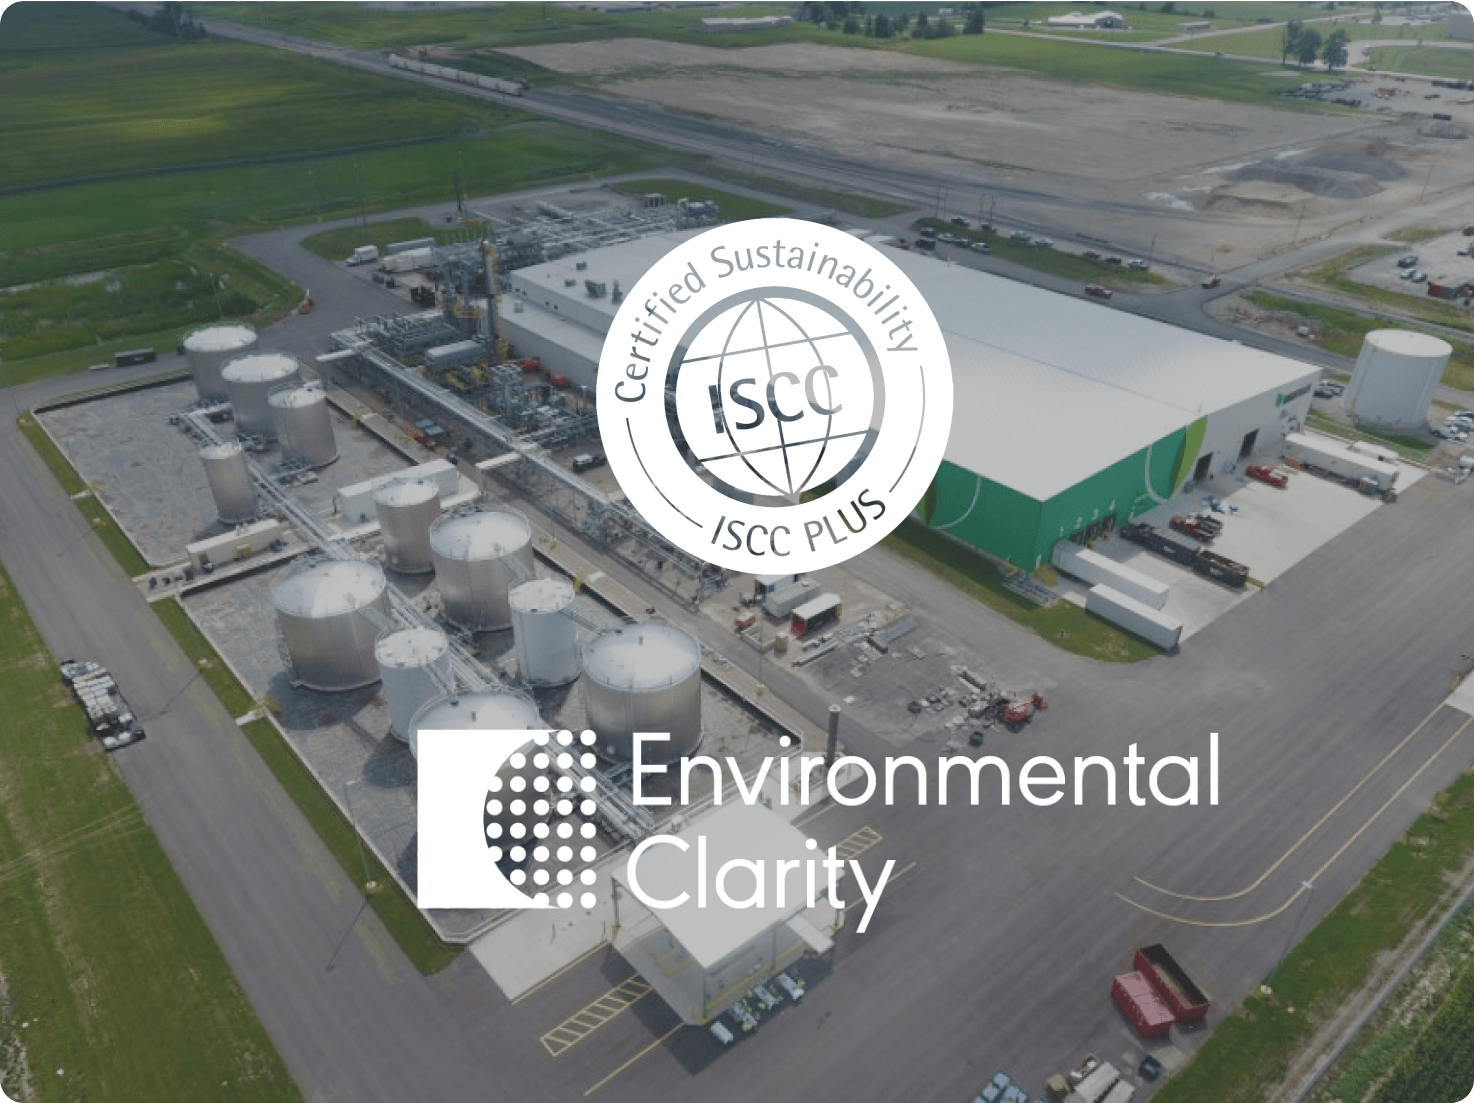 Arial image of one of Brightmark's Plastic Circularity Centers with the ISCC Plus and Environmental Clarity logos in the foreground.